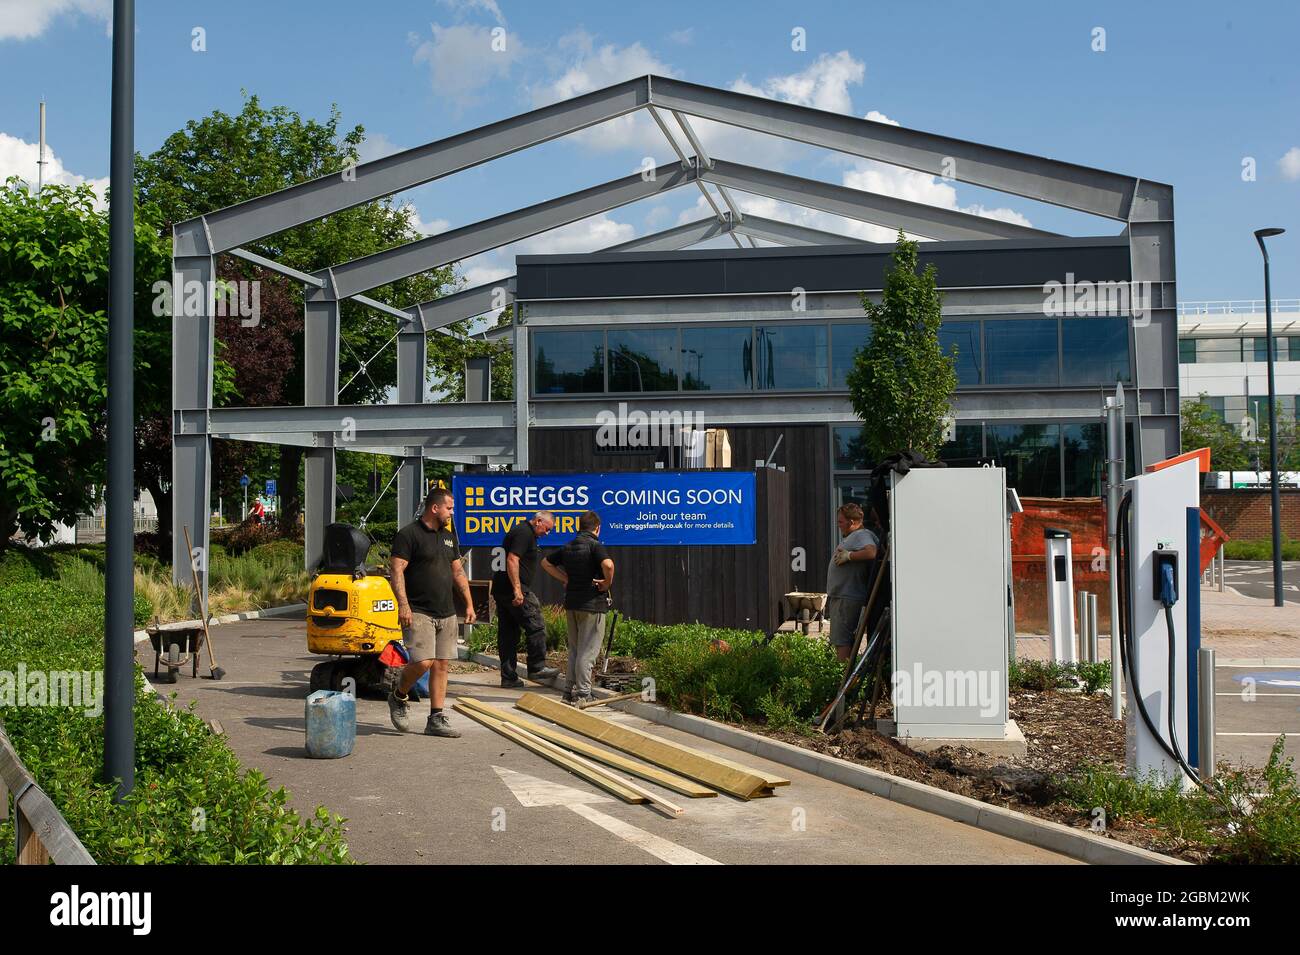 Slough, Berkshire, UK. 4th August, 2021. A new Greggs Drive Thru store is under construction in Slough. Bakers Greggs have announced that they are to recruit an additional 500 staff across their stores and that they plan to open another 100 branches this year. Credit: Maureen McLean/Alamy Live News Stock Photo